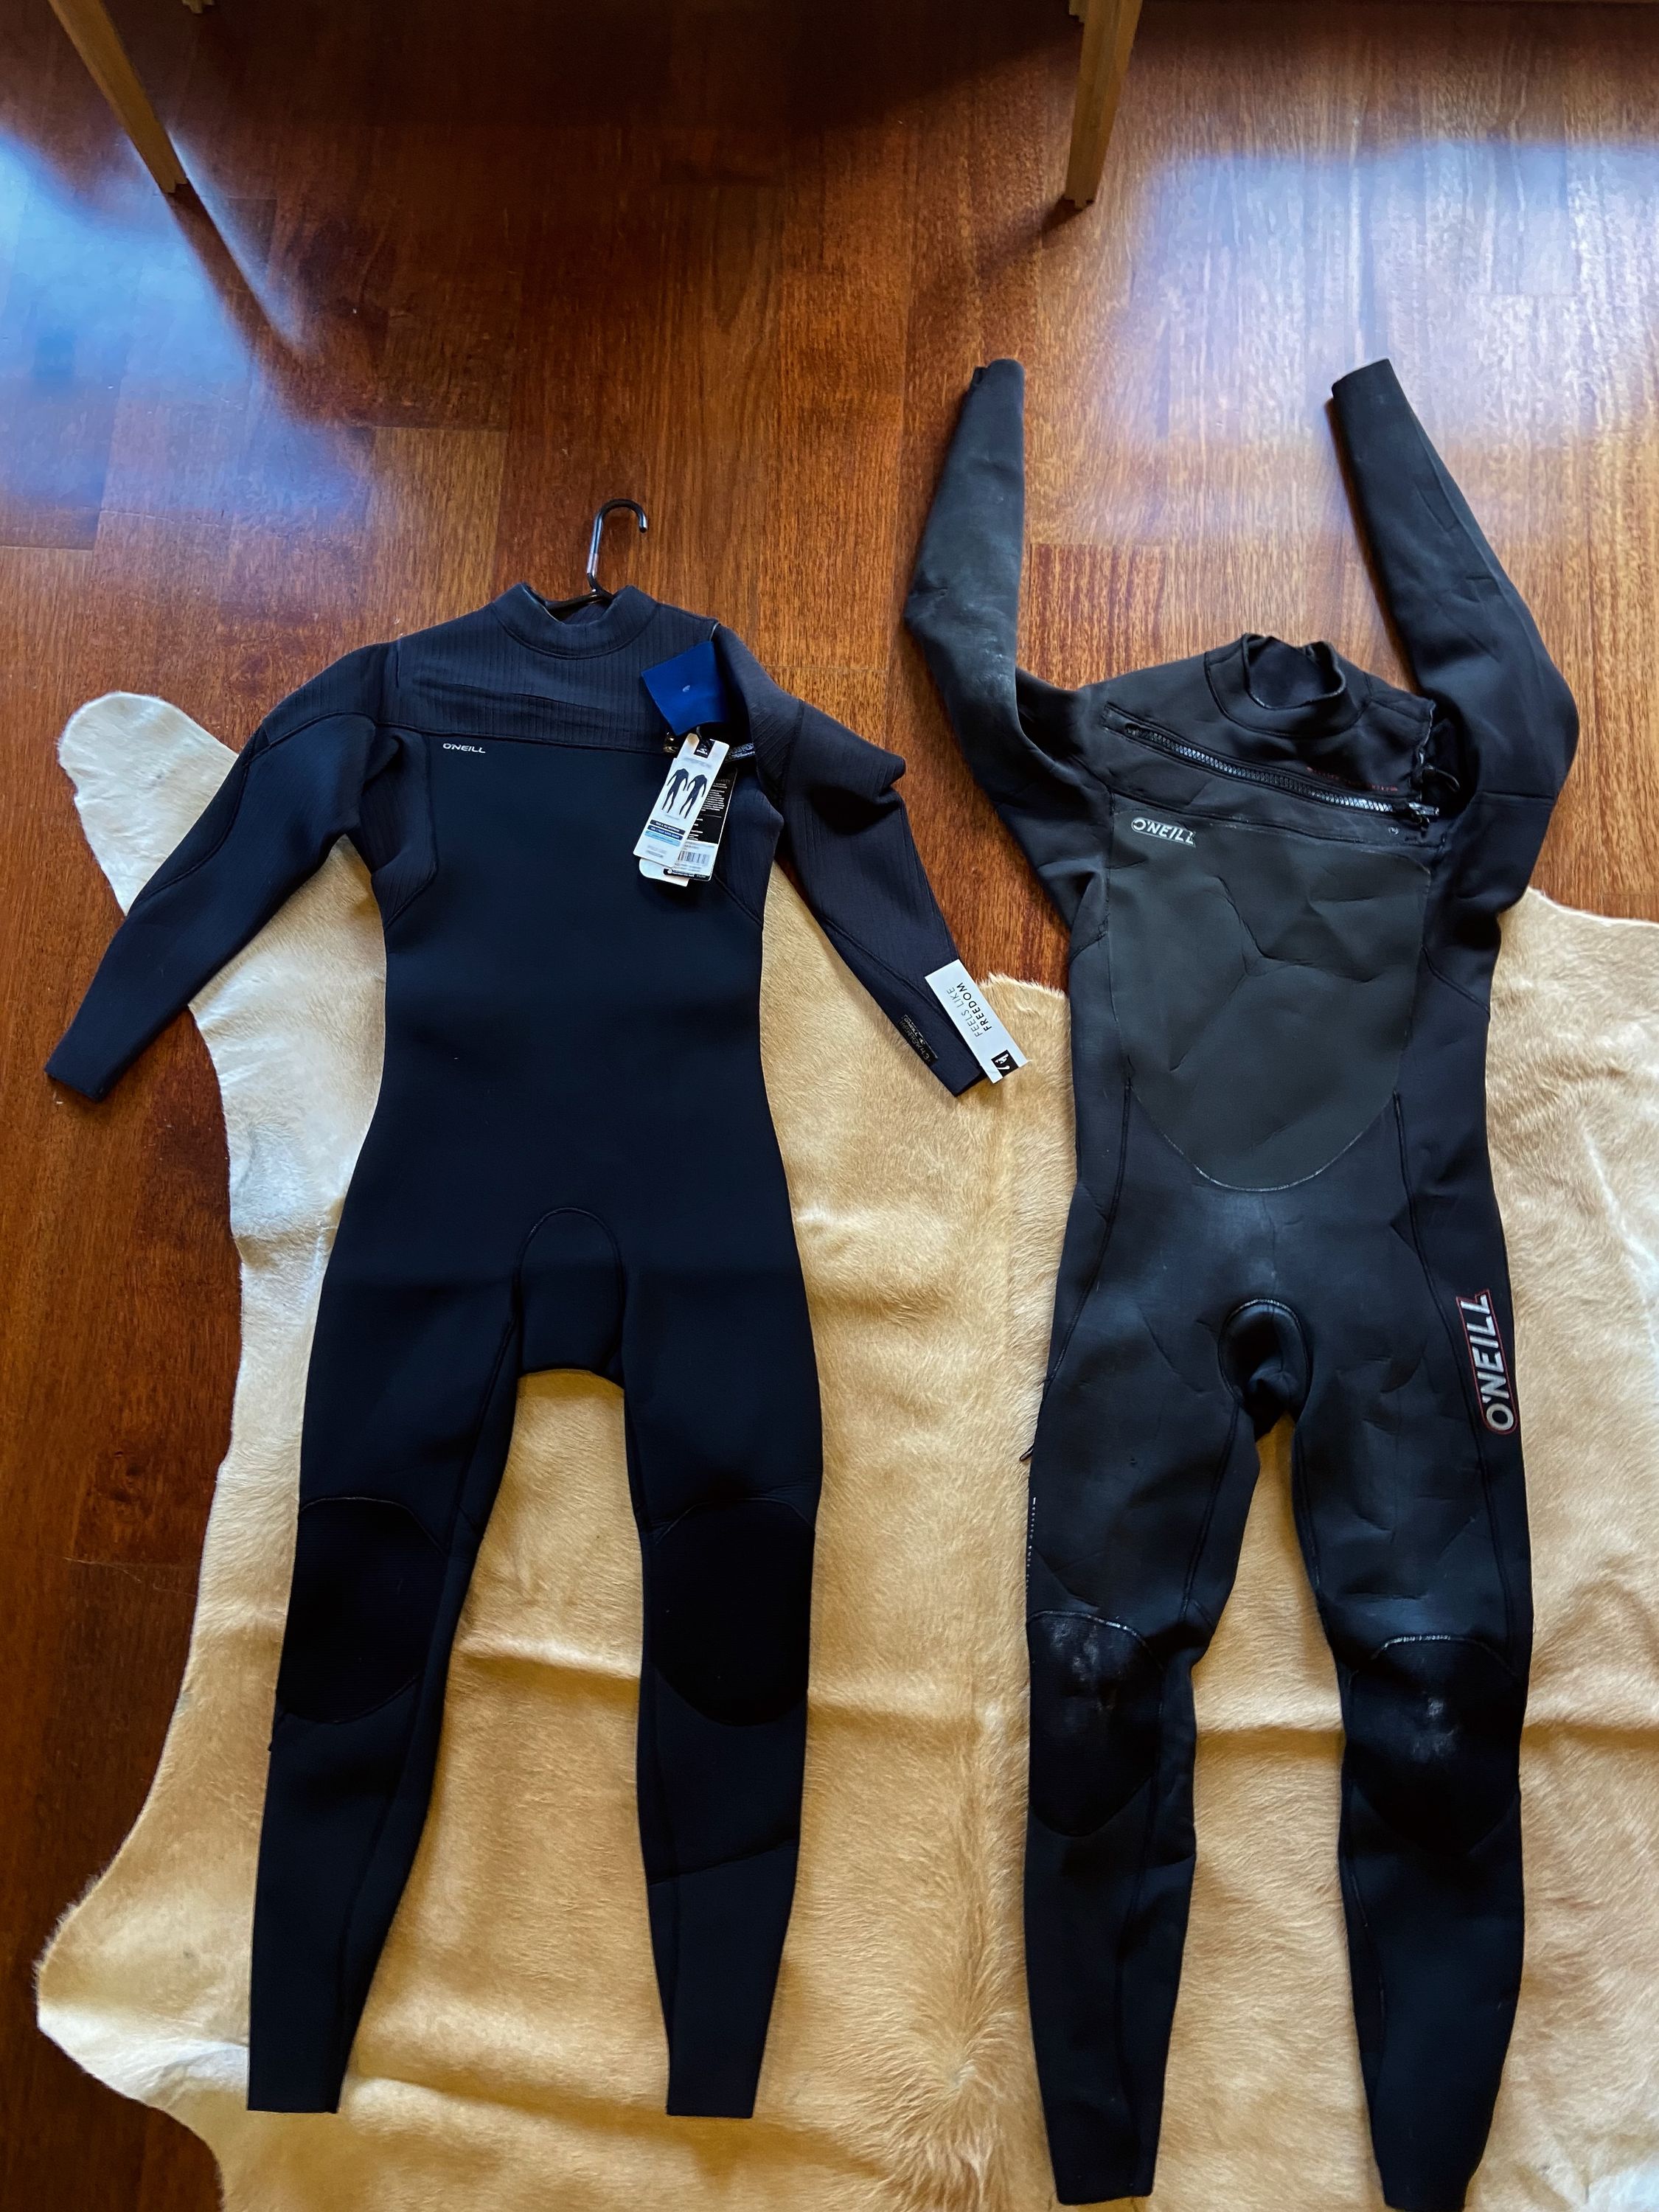 Old wetsuit